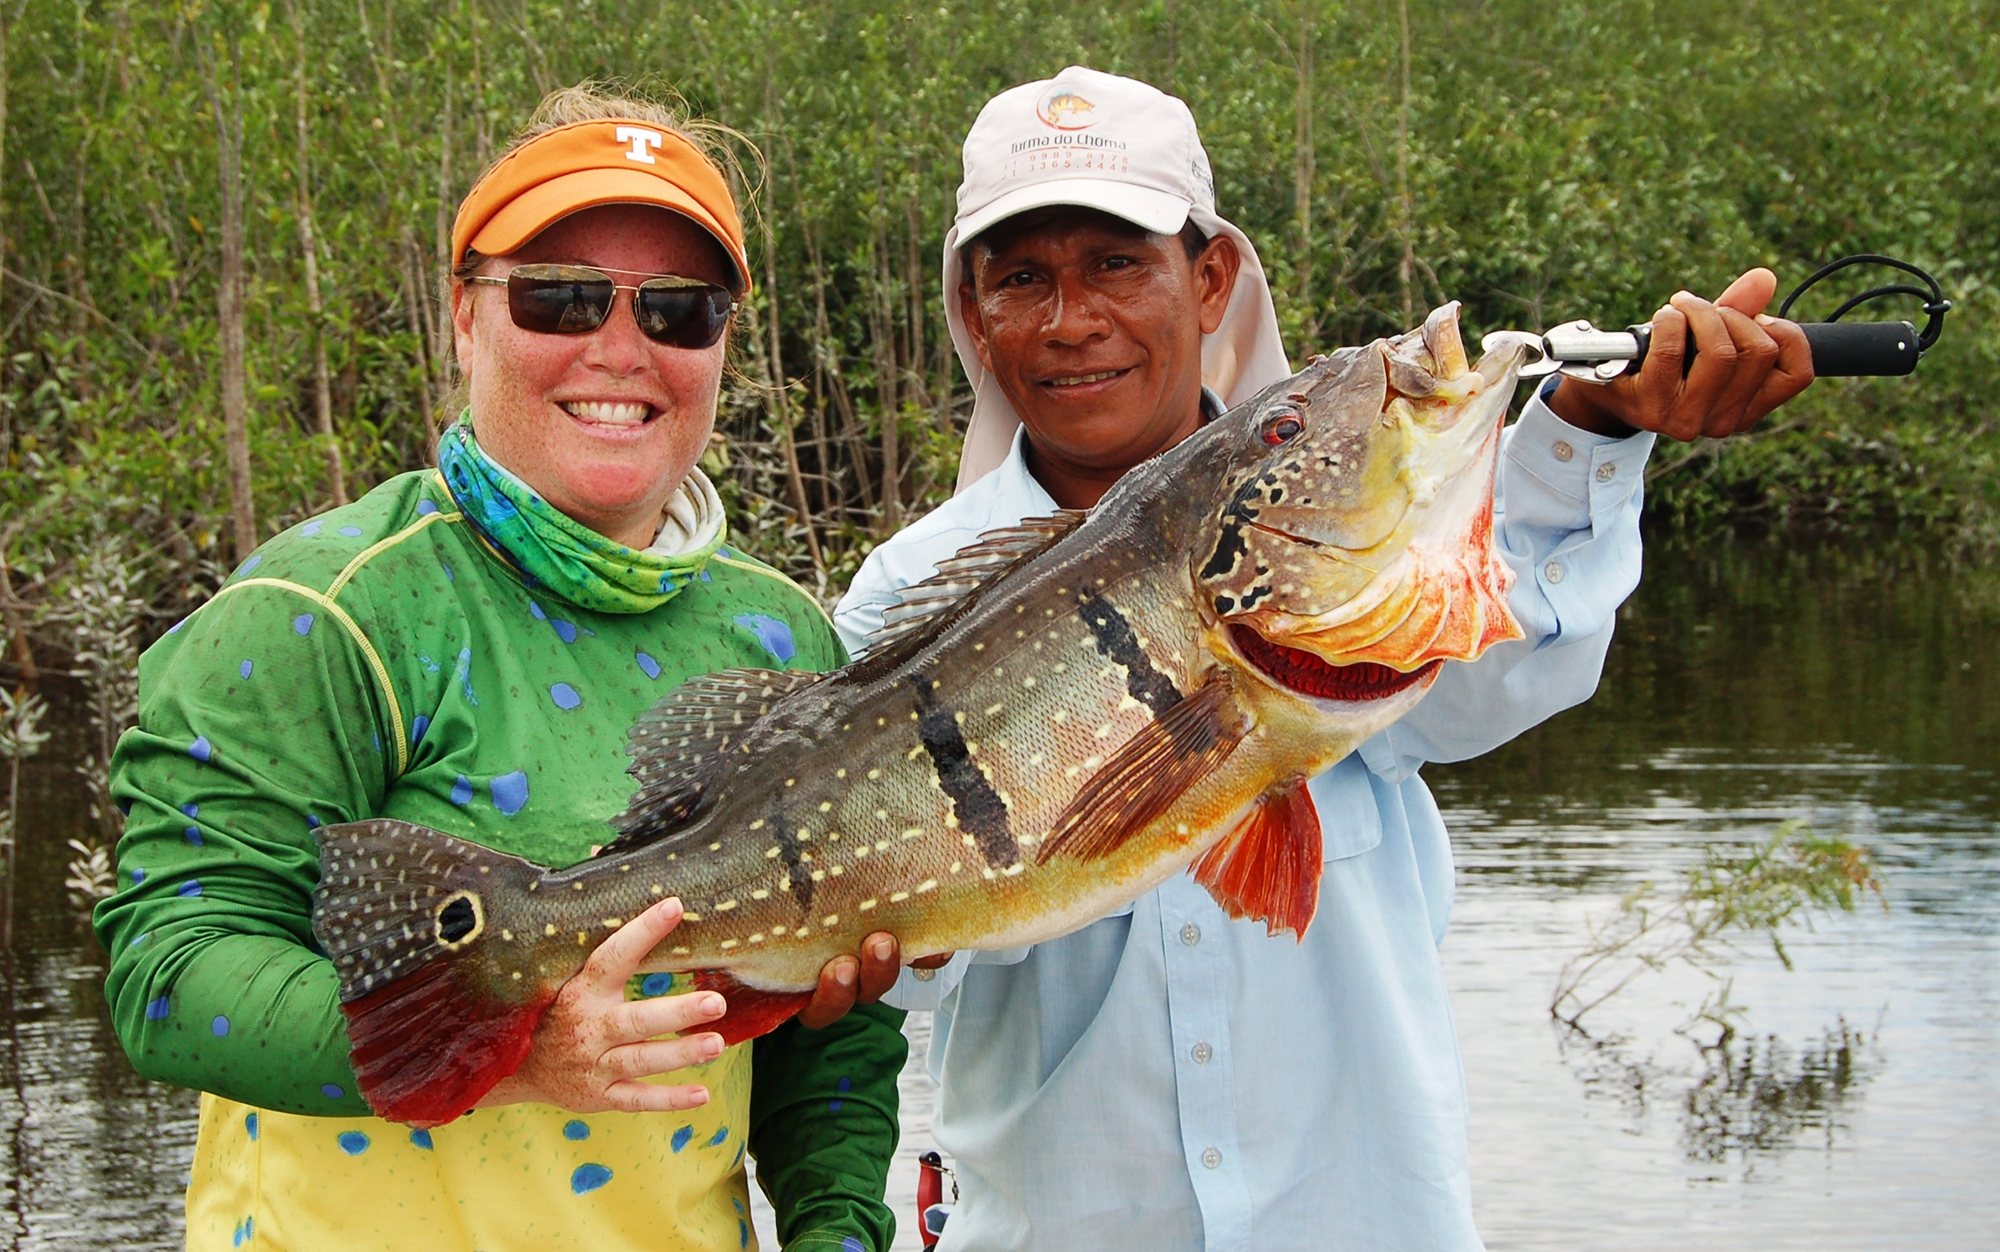 Two anglers weigh giant fish with boga grip.